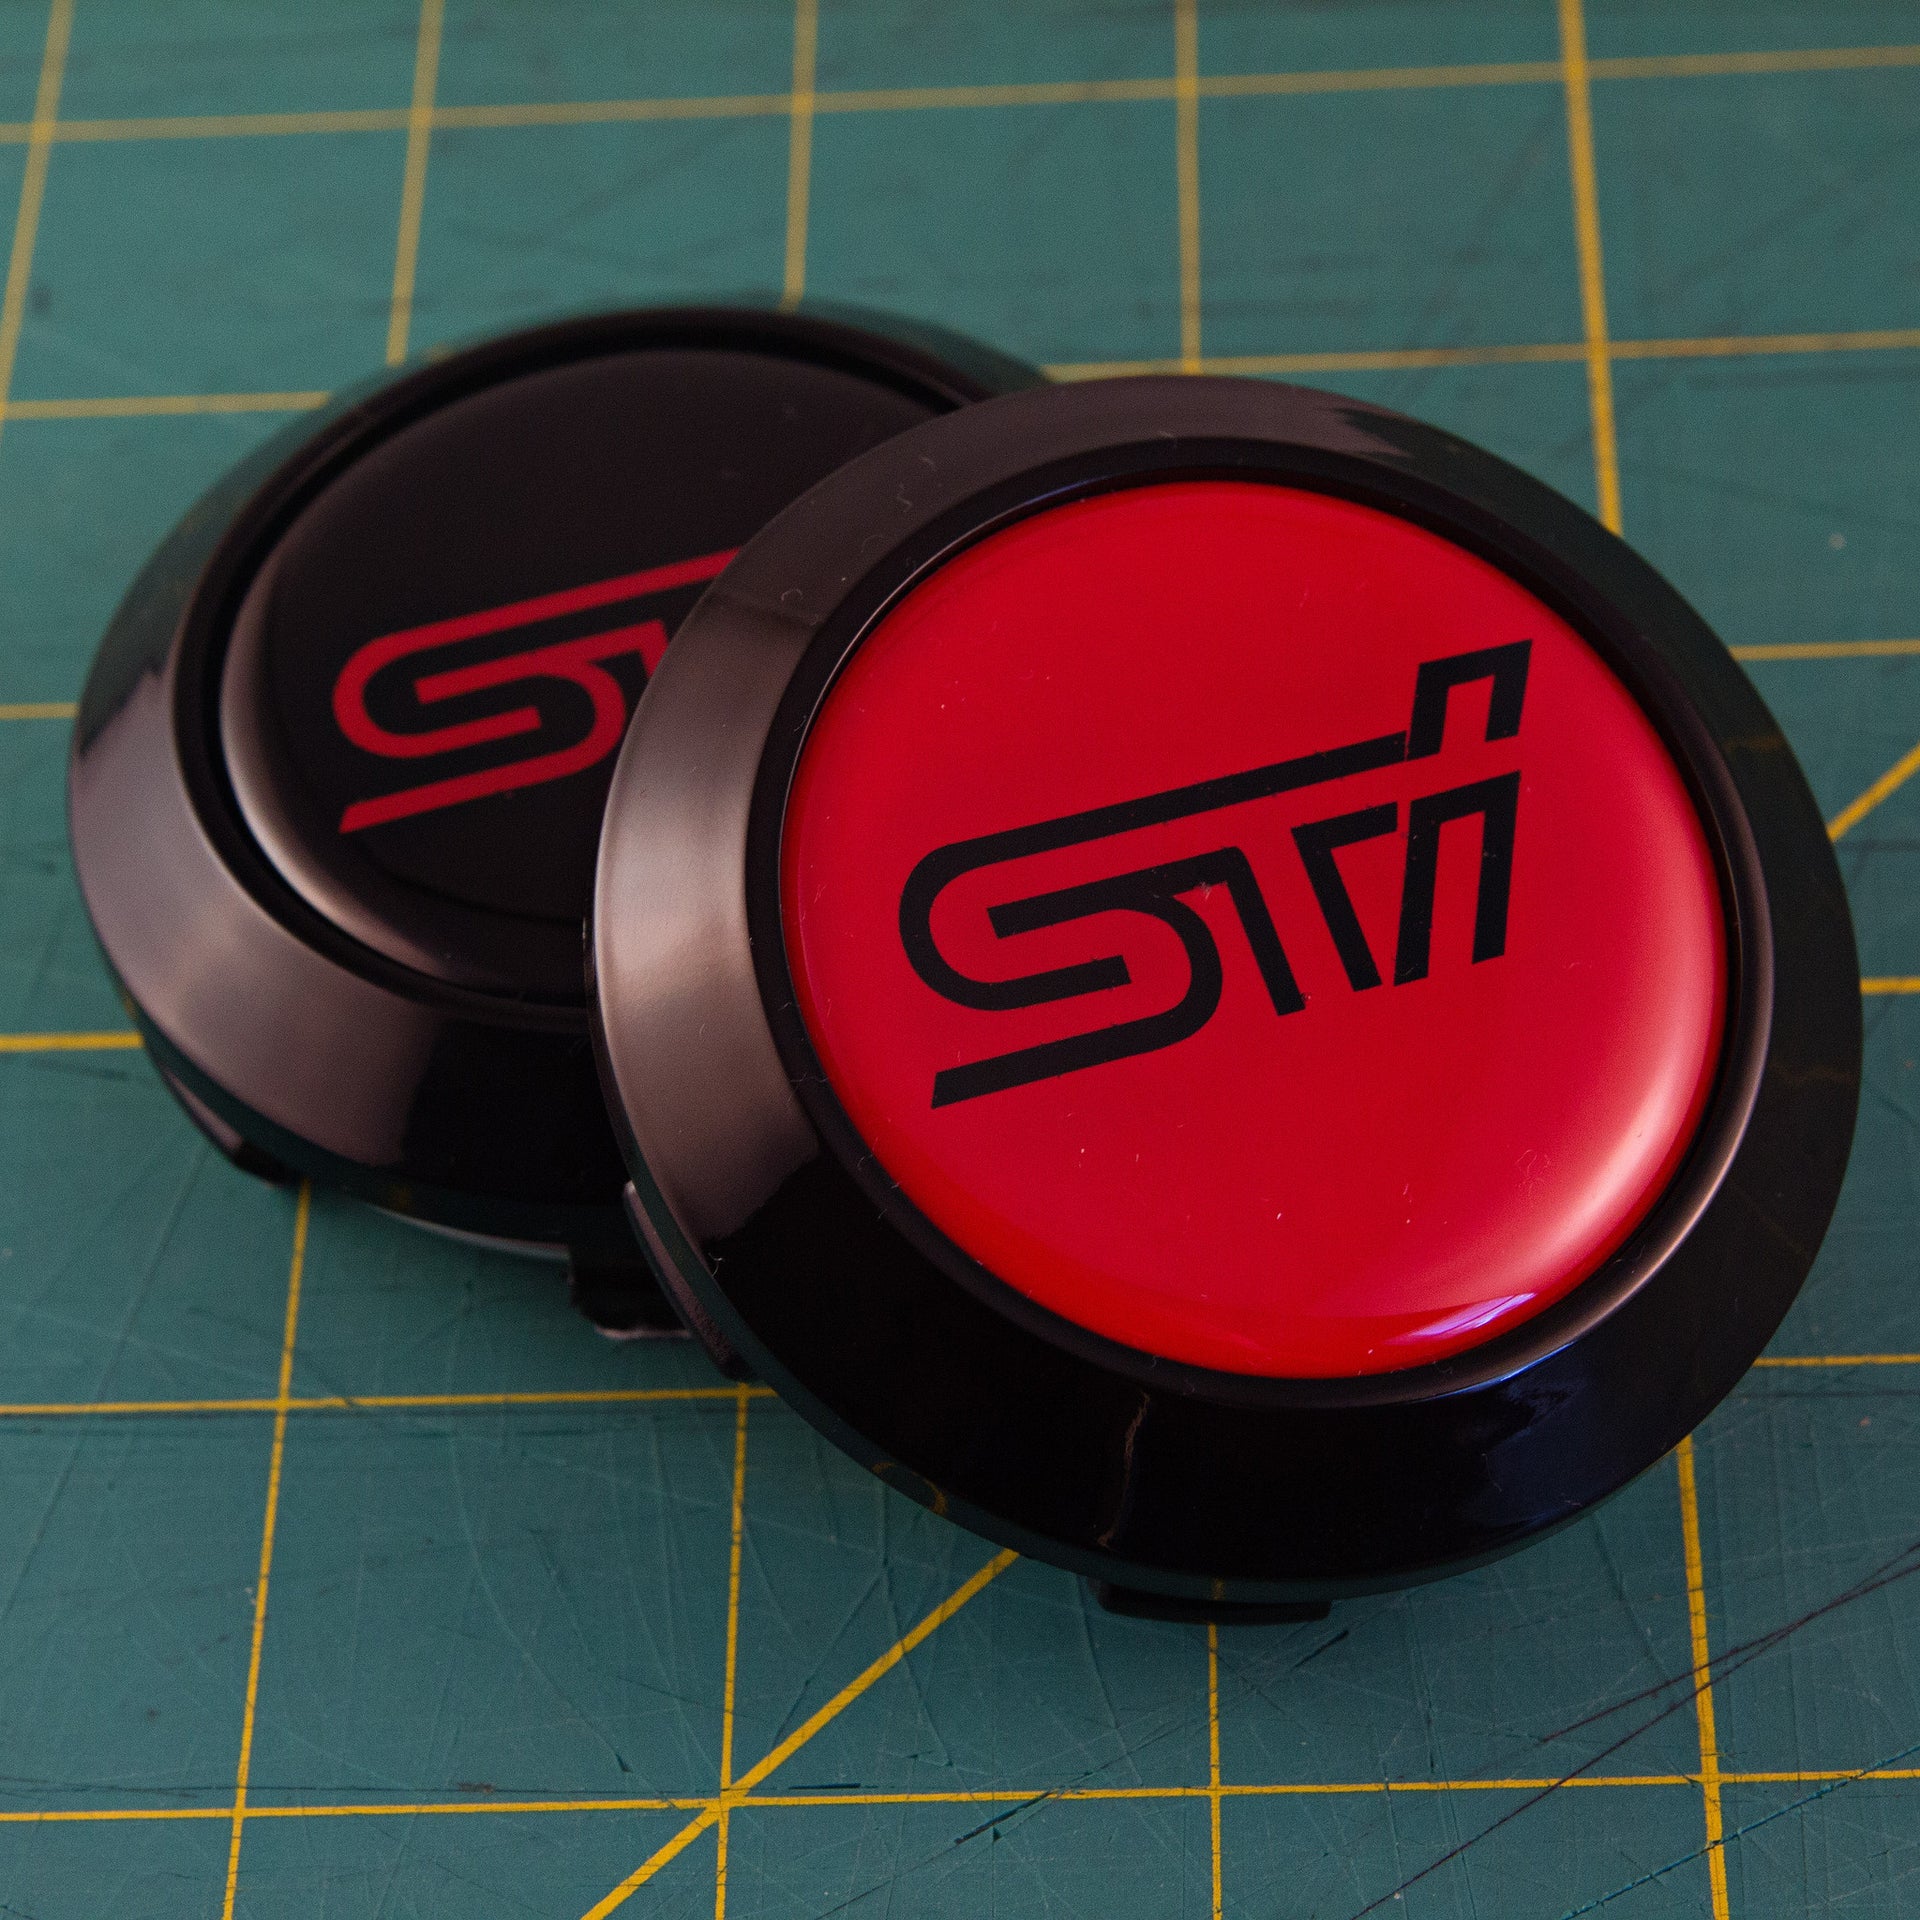 Black STI logo on red background with a black cap